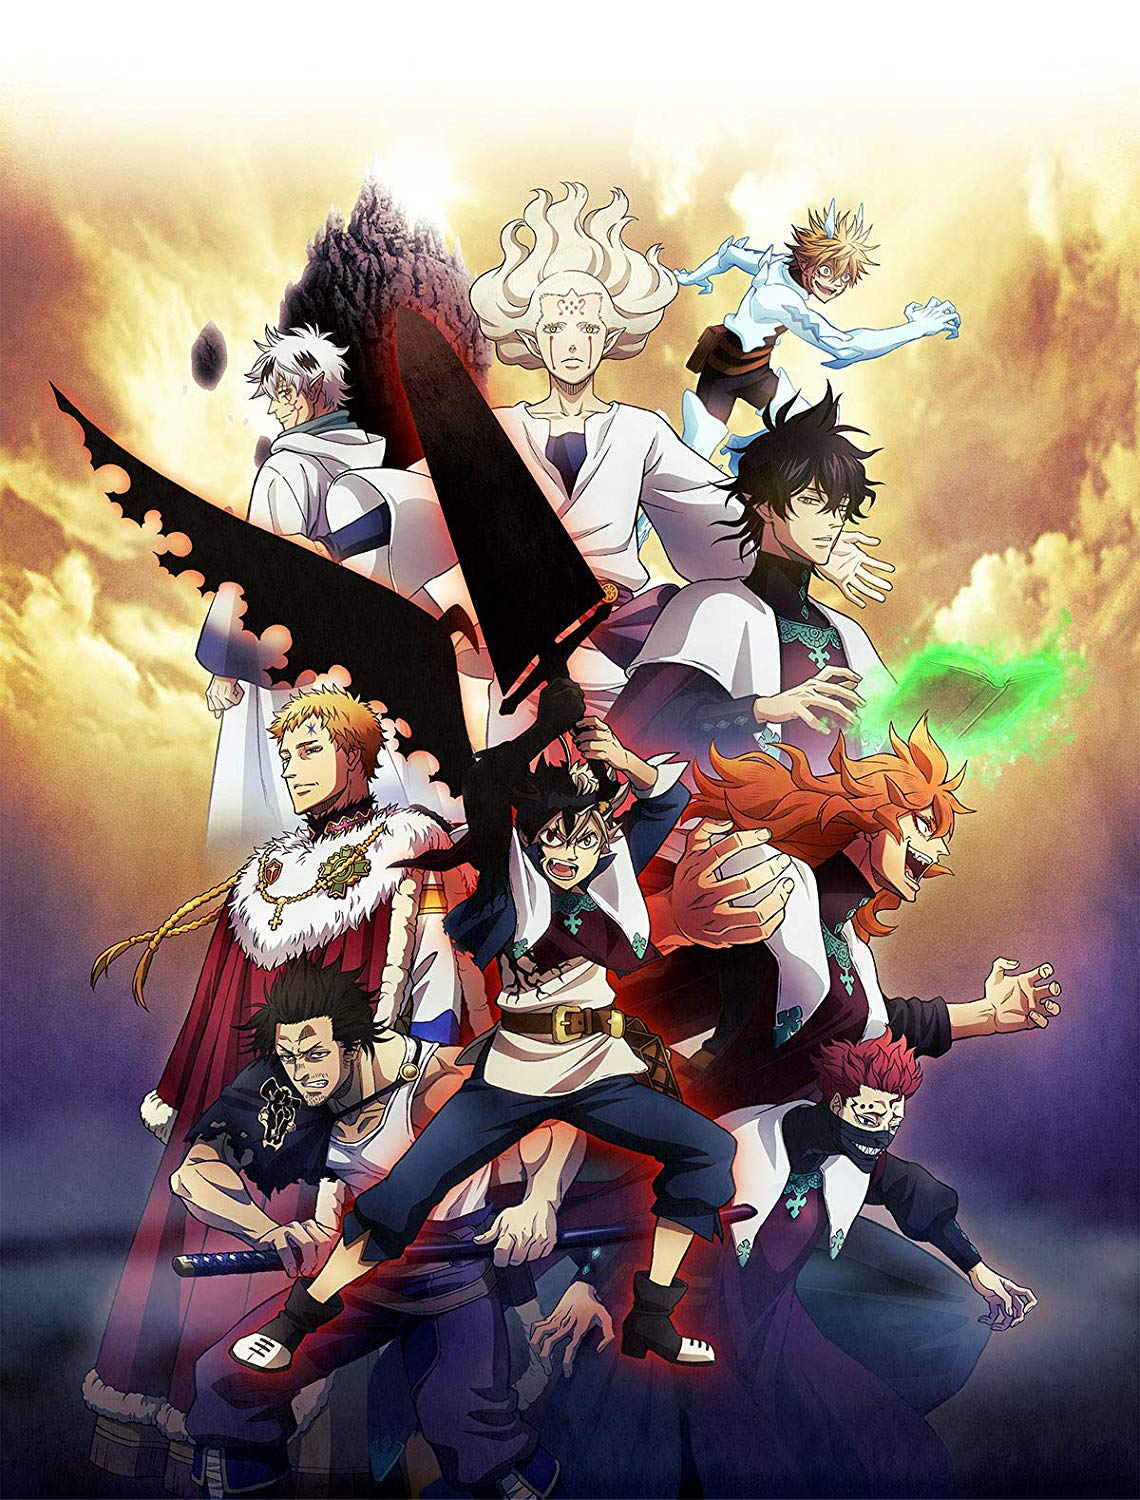 Black Clover The Complete Season One Bluray  Best Buy